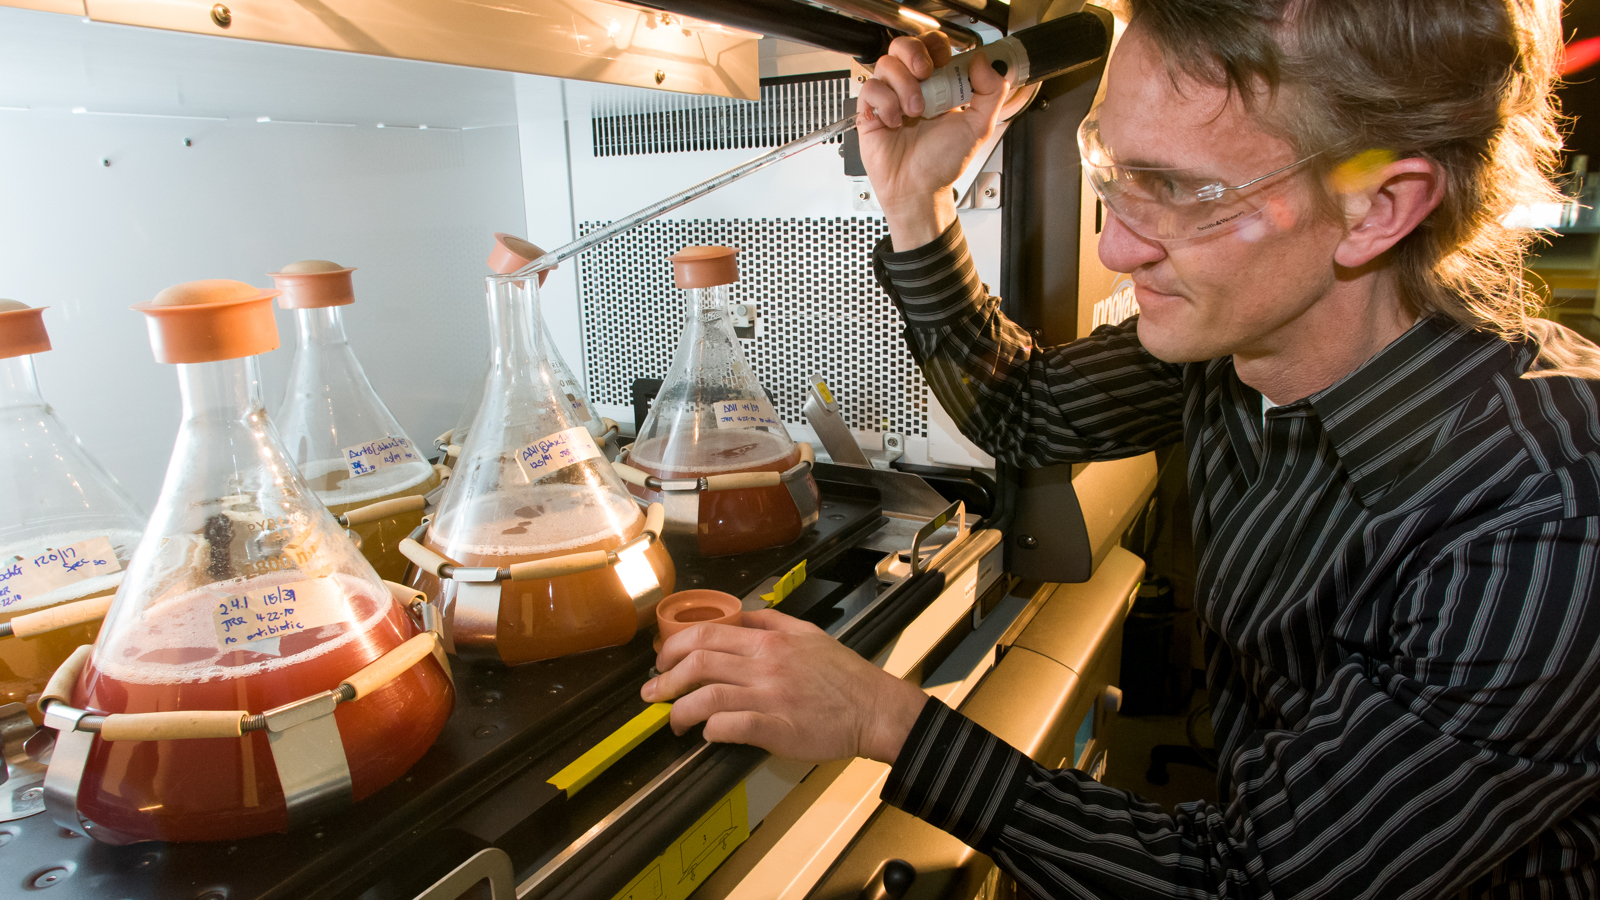 Argonne biophysicist Phil Laible oversees the growth of new photosynthetic bacteria designed to produce biofuels.